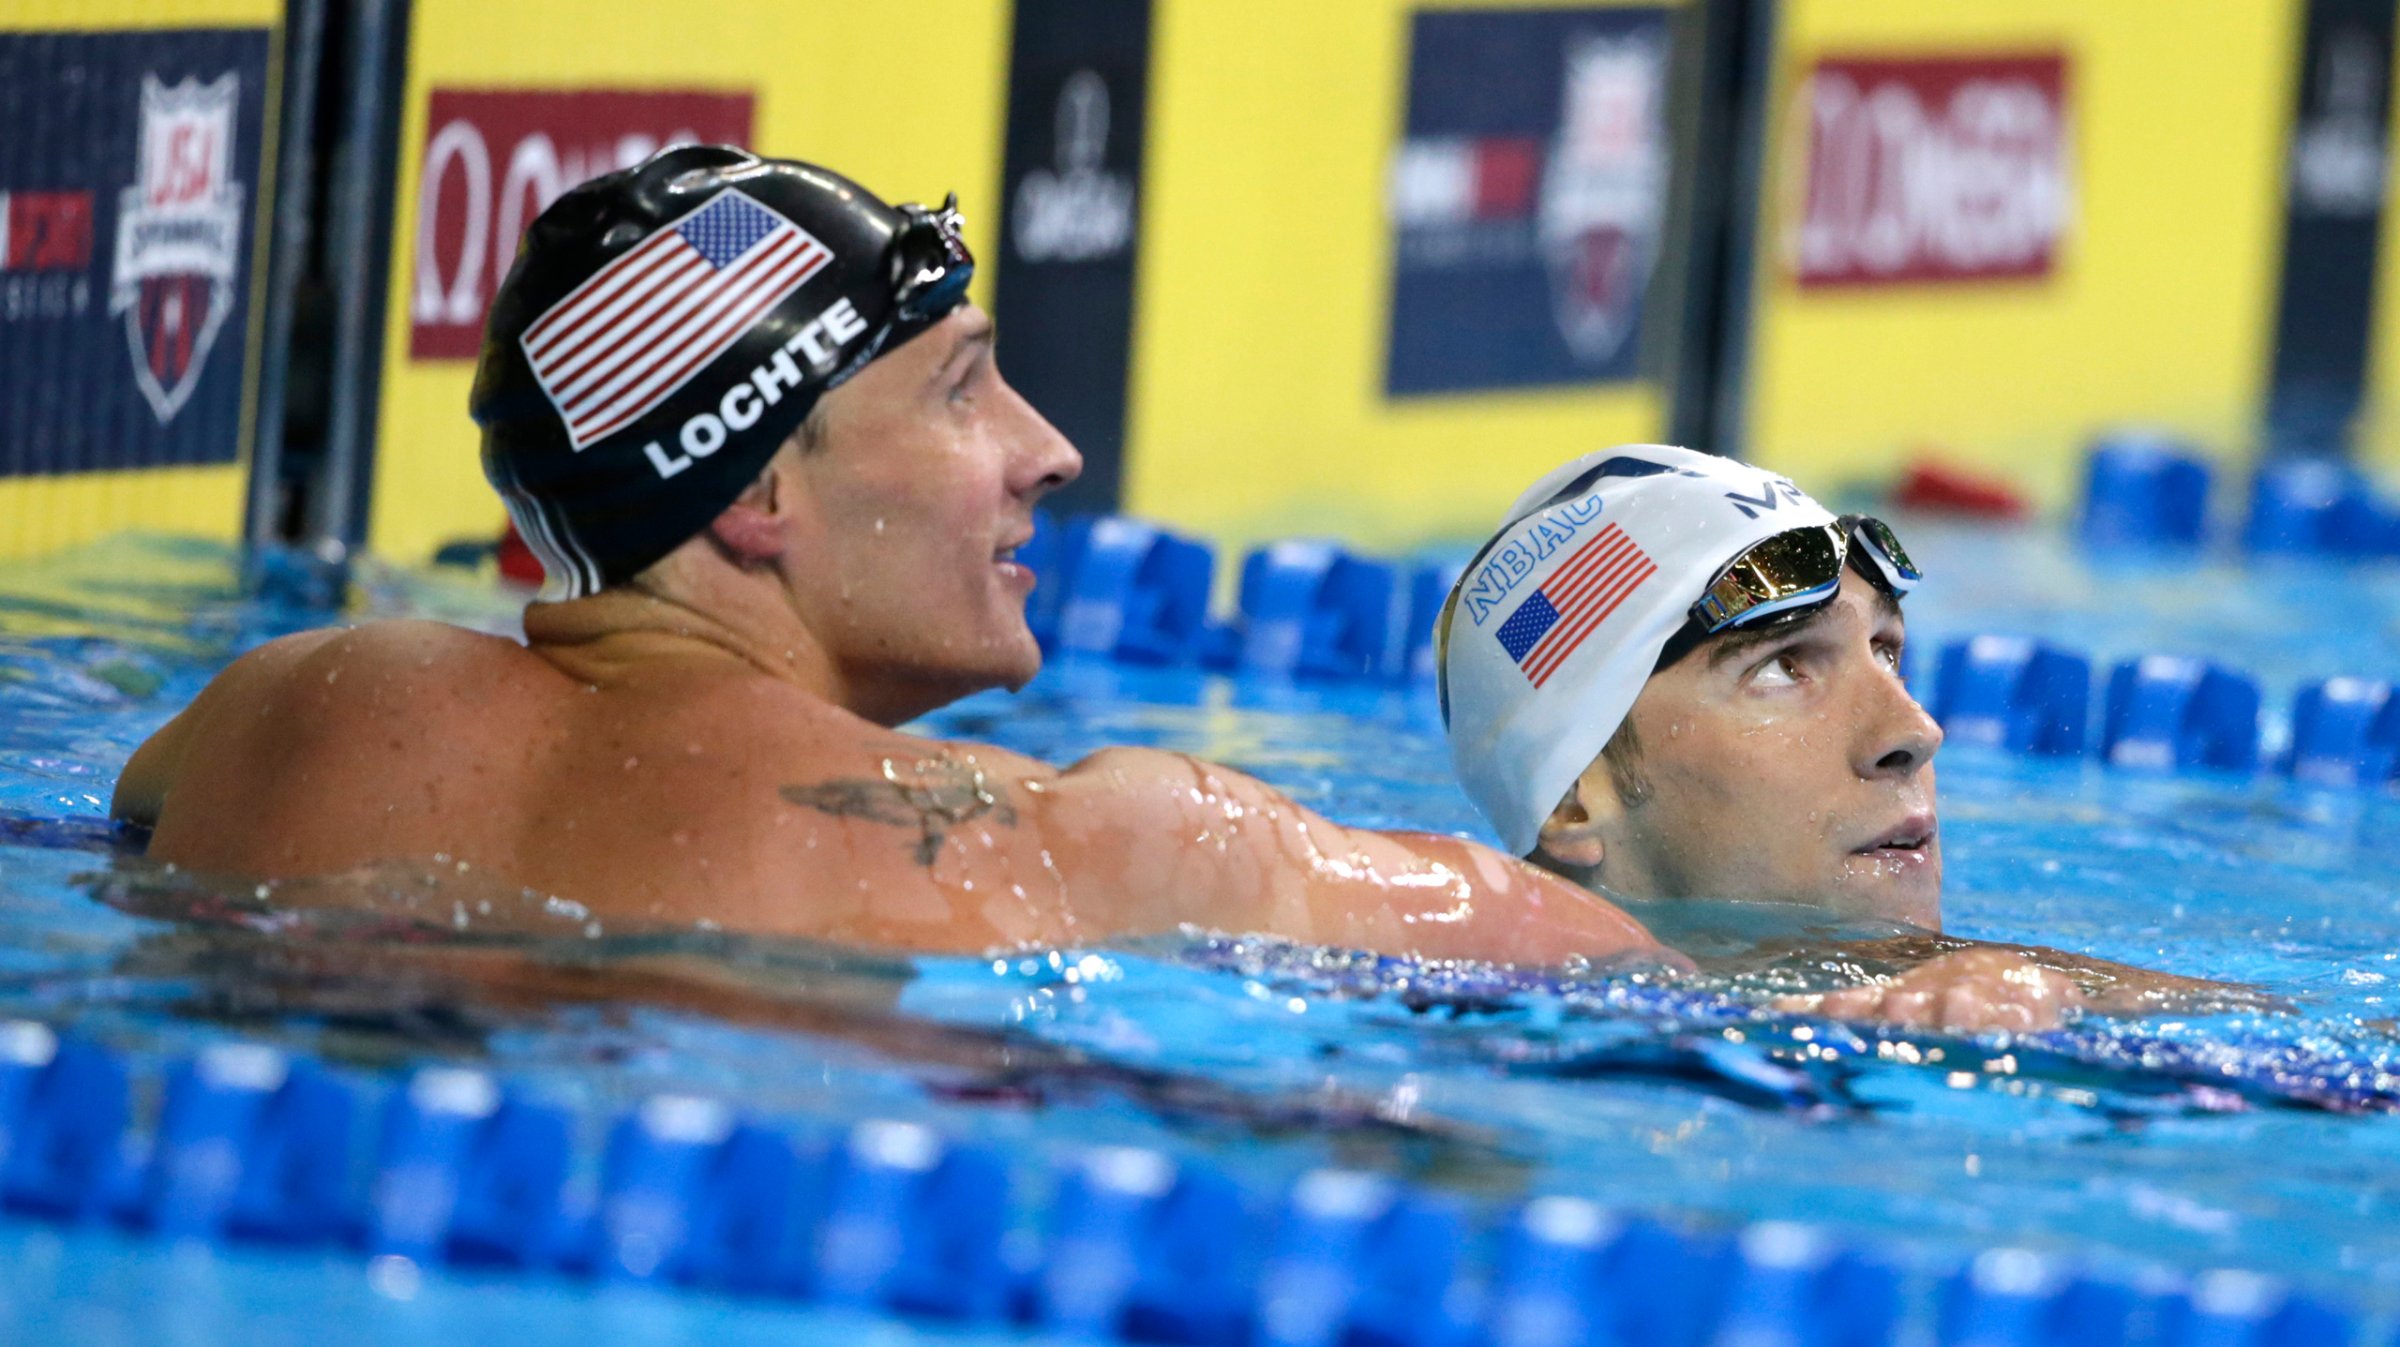 Michael Phelps, right, reacts with Ryan Lochte, left, after winning the men's 200-meter individual medley final at the U.S. Olympic swimming trials, in Omaha, Neb. on July 1, 2016. Lochte finished in second place.